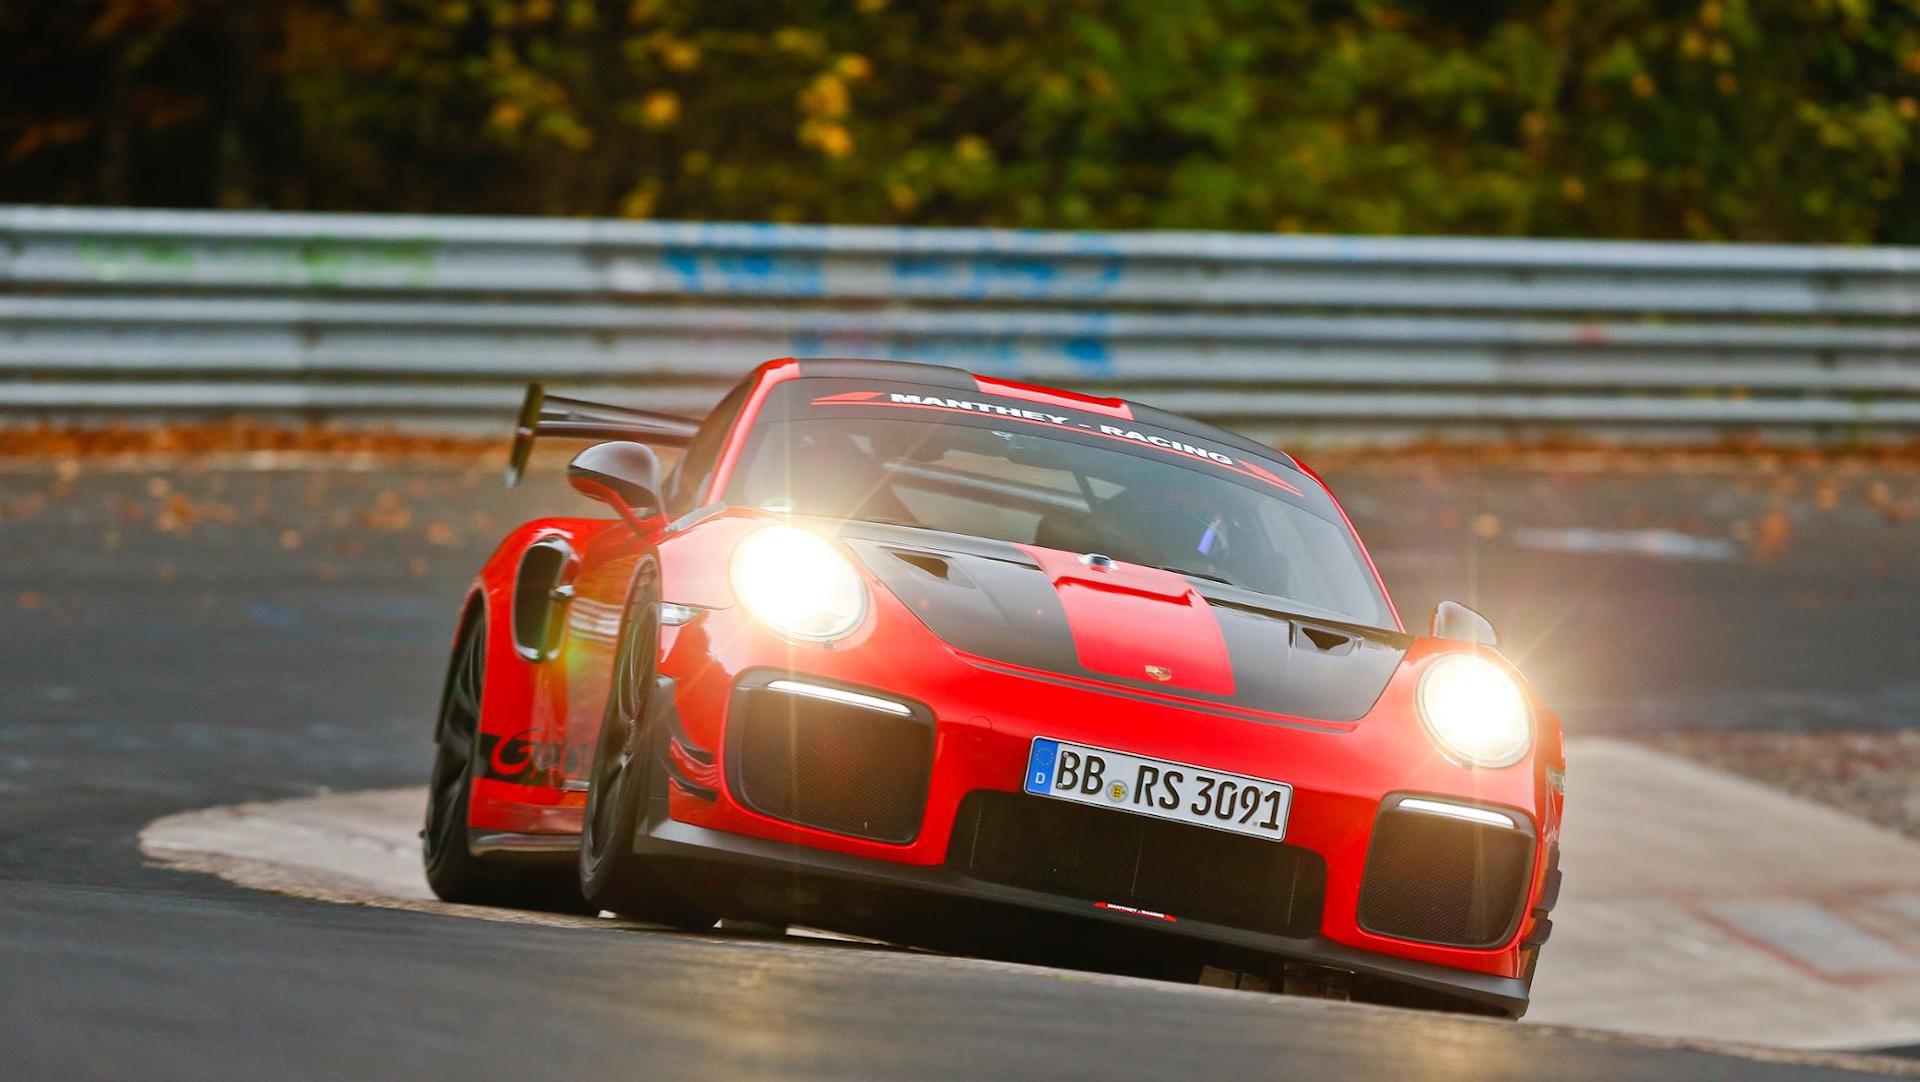 Porsche sets 6:40.3 Nürburgring record with modified, street-legal 911